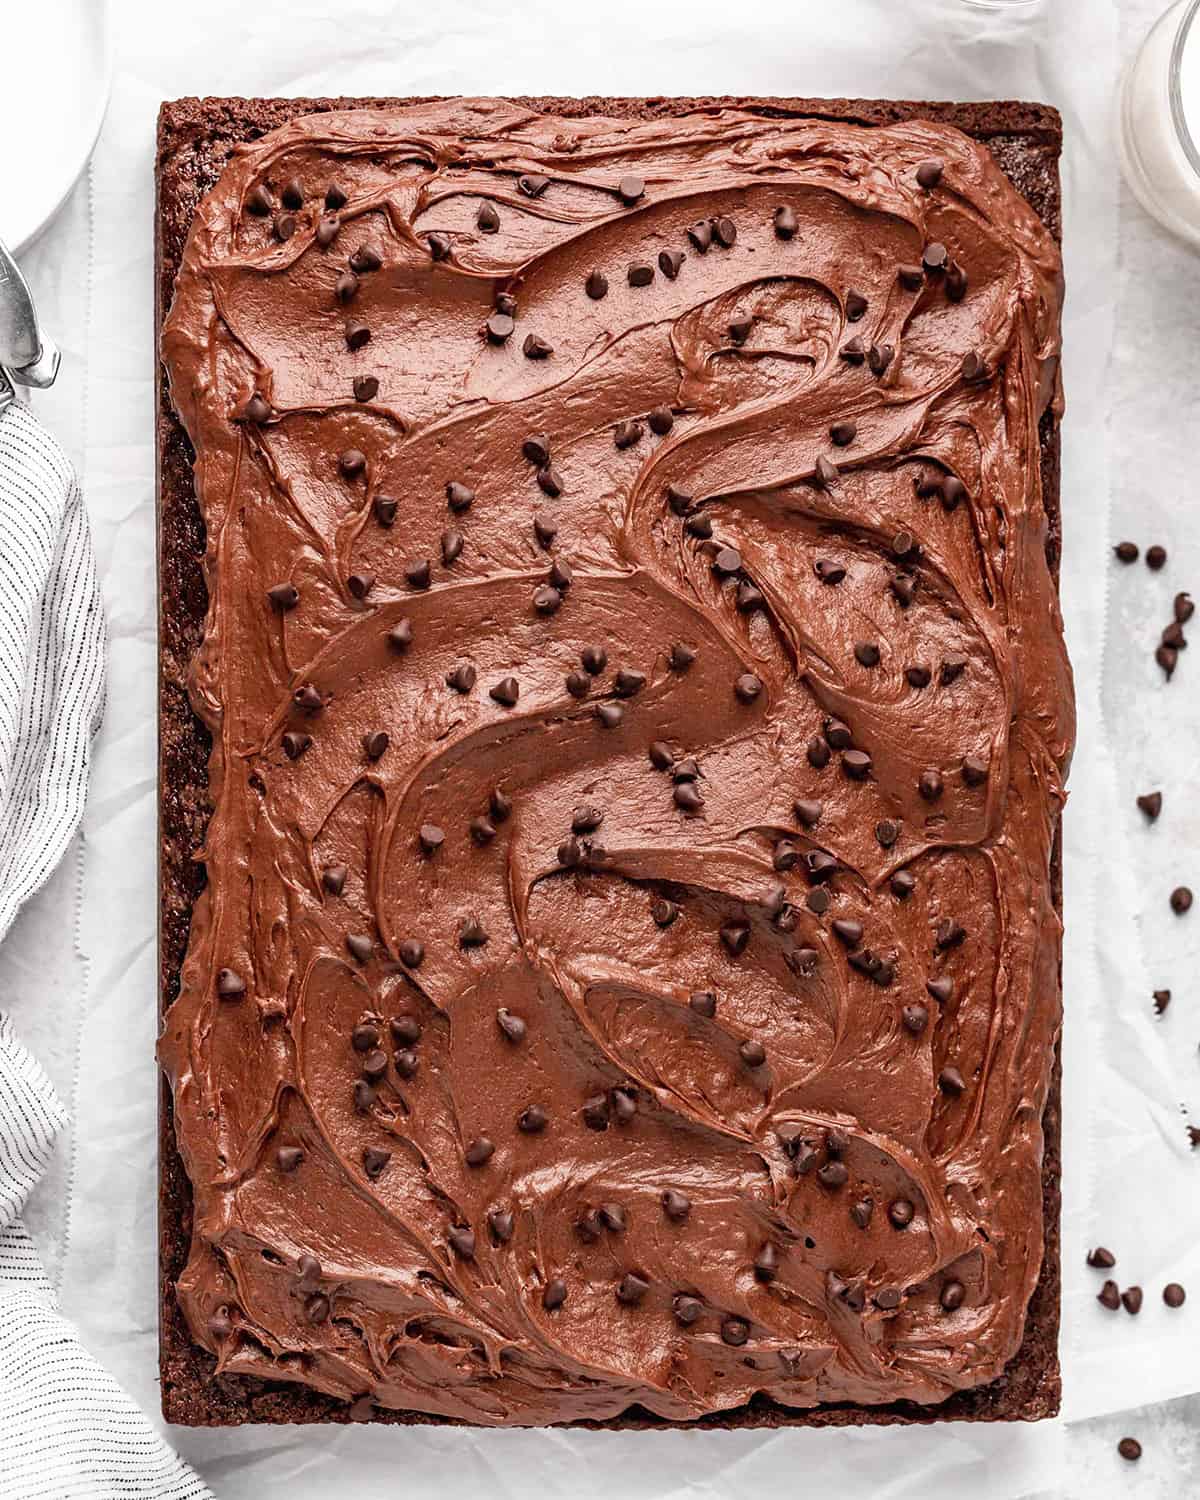 Chocolate Sheet Cake frosted with chocolate frosting and sprinkled with chocolate chips